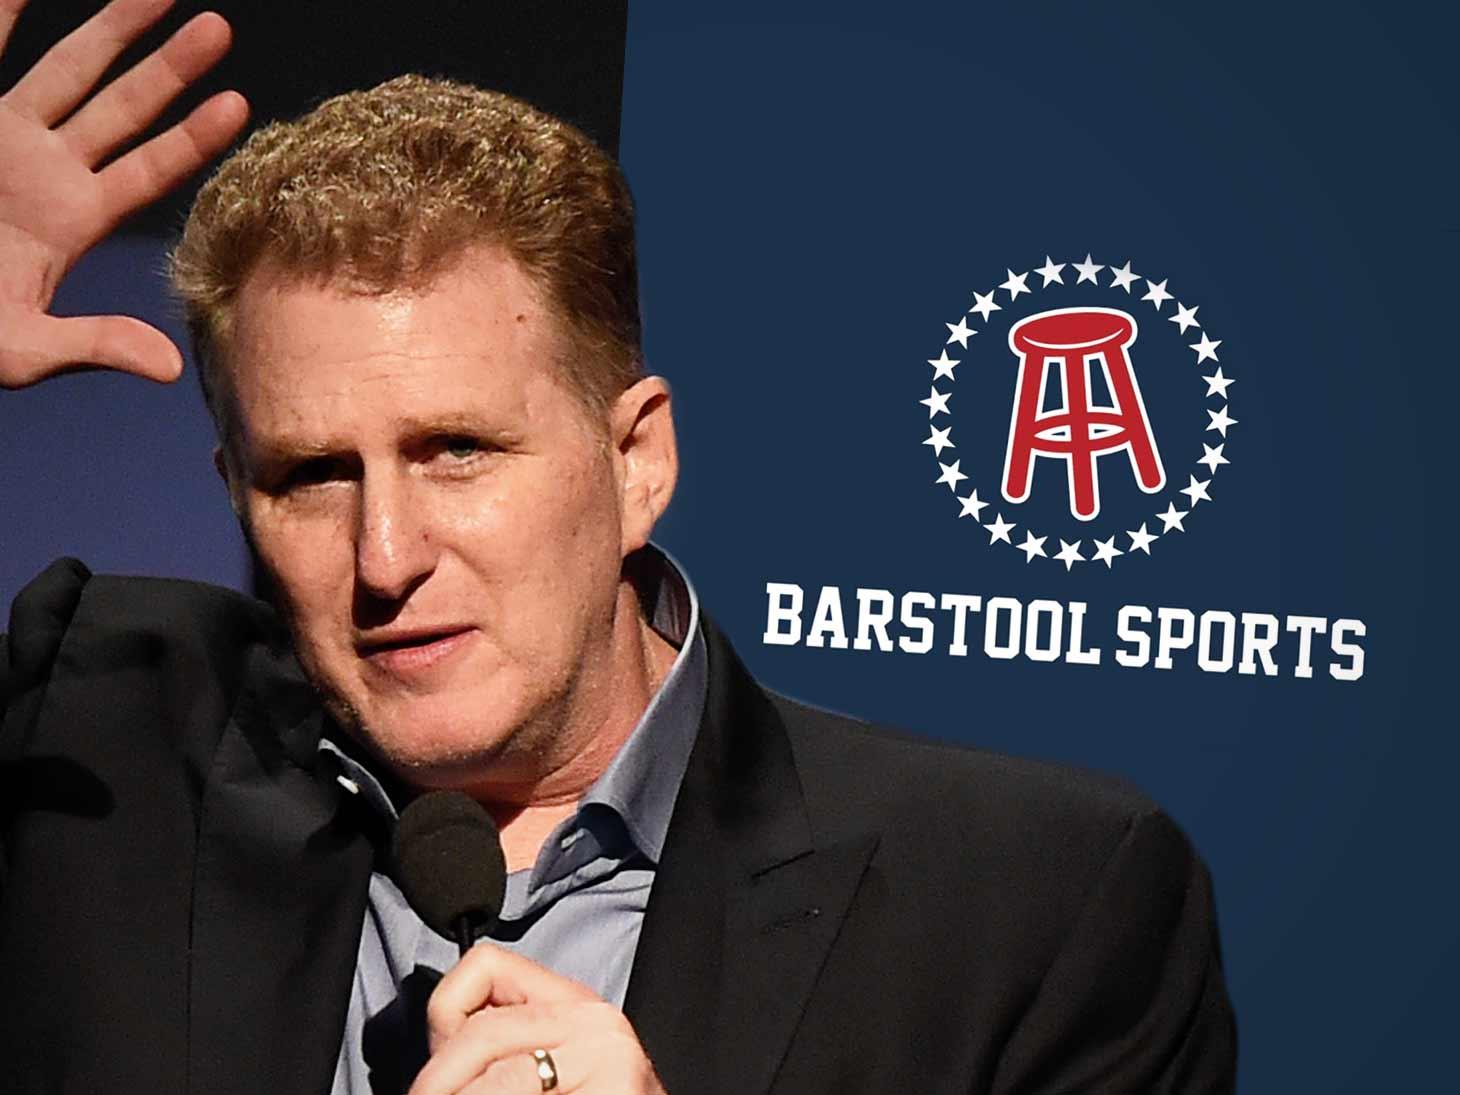 Michael Rapaport Accuses ‘Smitty’ from Barstool Sports of Harassing Him Daily After Filing Lawsuit